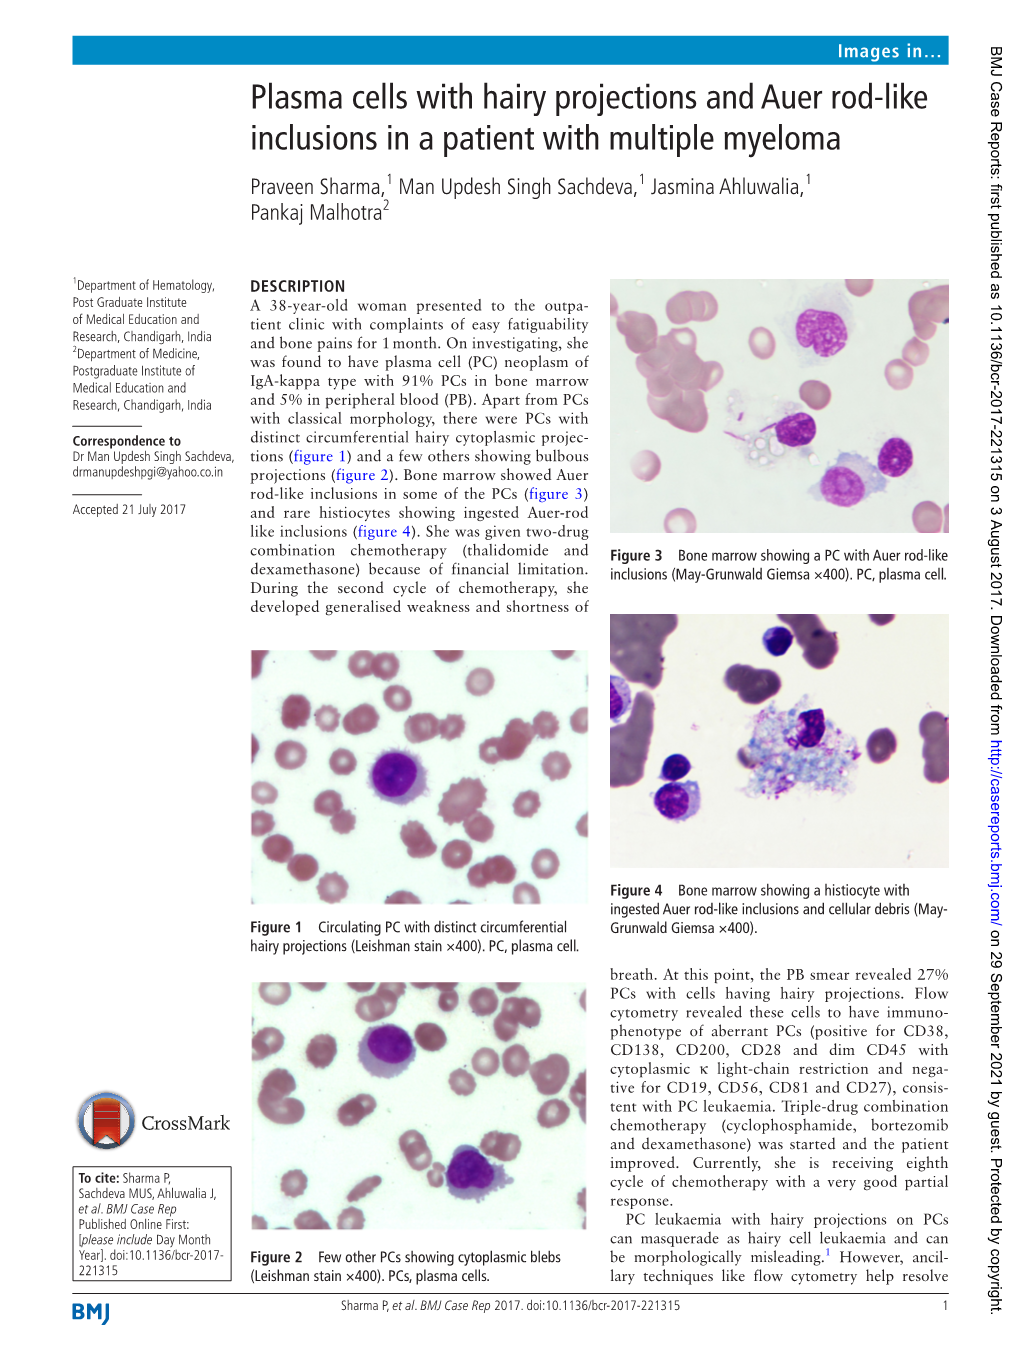 Plasma Cells with Hairy Projections and Auer Rod-Like Inclusions in A